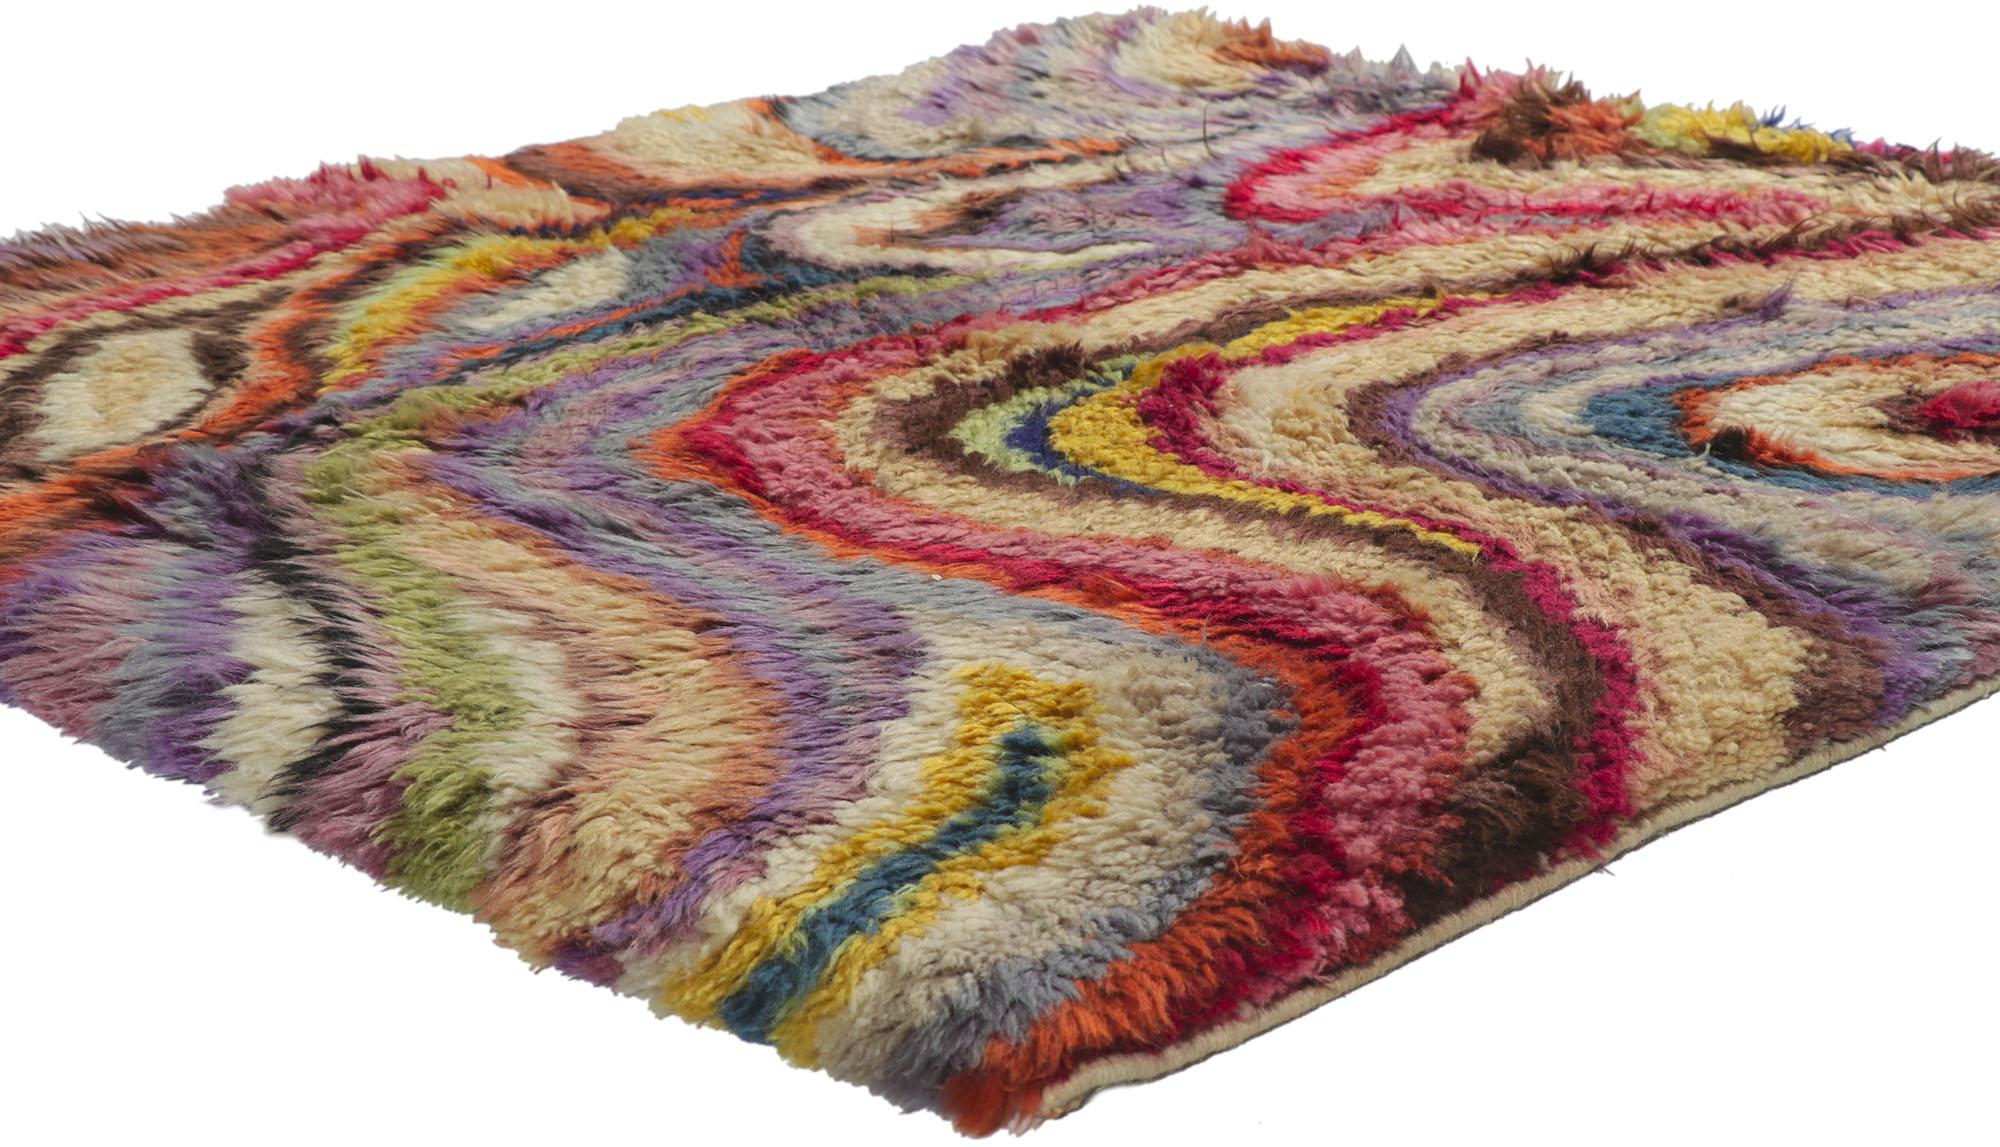 78167 Vintage Swedish Rya swirl rug with Abstract Expressionist Style 04'04 x 04'07. Full of tiny details and a bold expressive design combined with abstract expressionist style, this hand-knotted wool vintage Swedish Ryijy Rya rug is a captivating